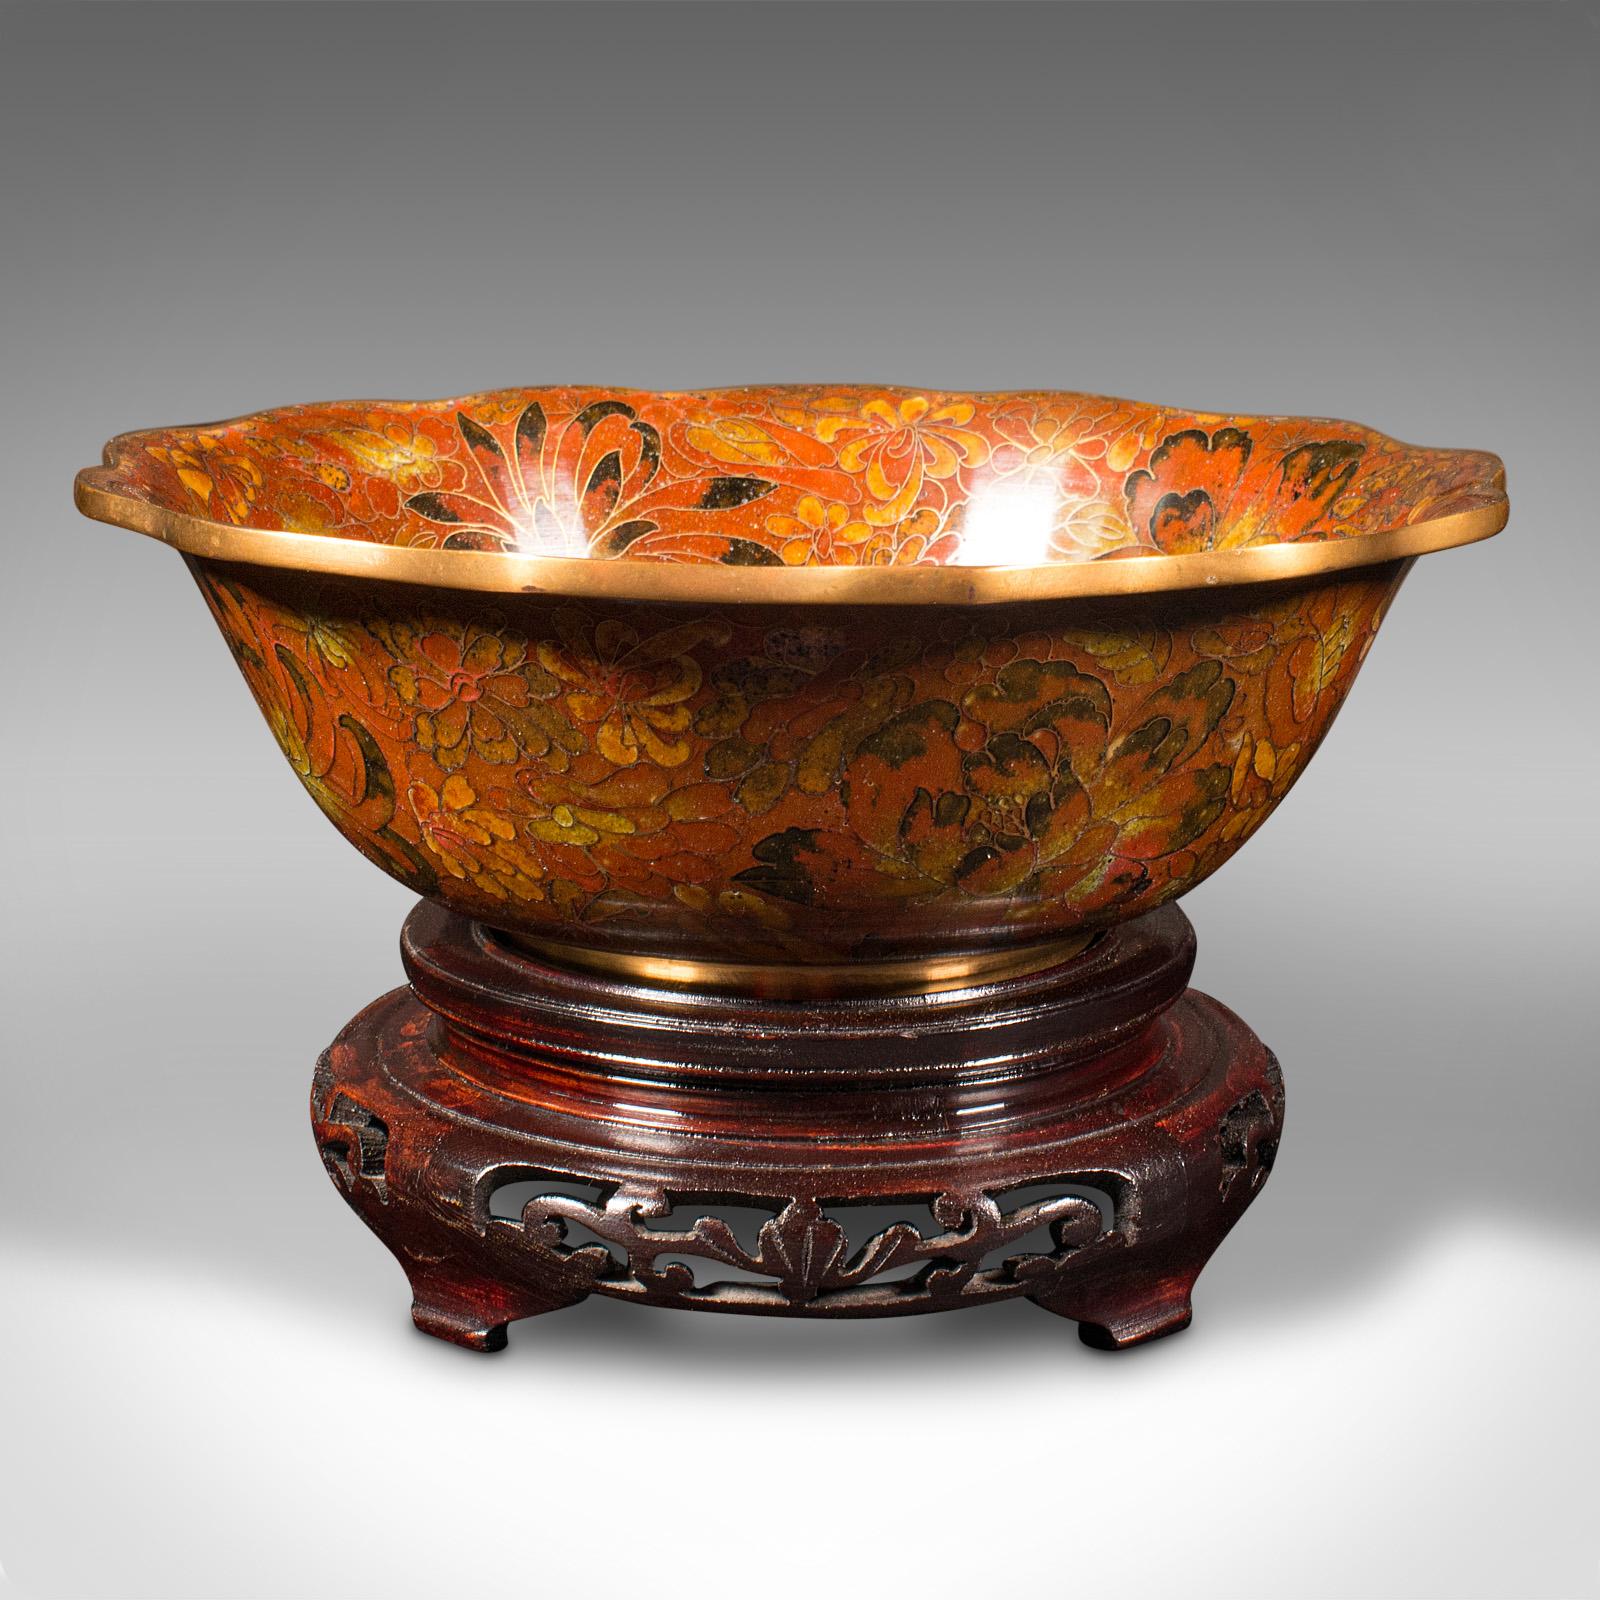 This is a vintage decorative display bowl. A Japanese, cloisonné dish on stand, dating to the late Art Deco period, circa 1940.

Wonderfully unusual colour in the manner of traditional satsuma ware
Displays a desirable aged patina and in good